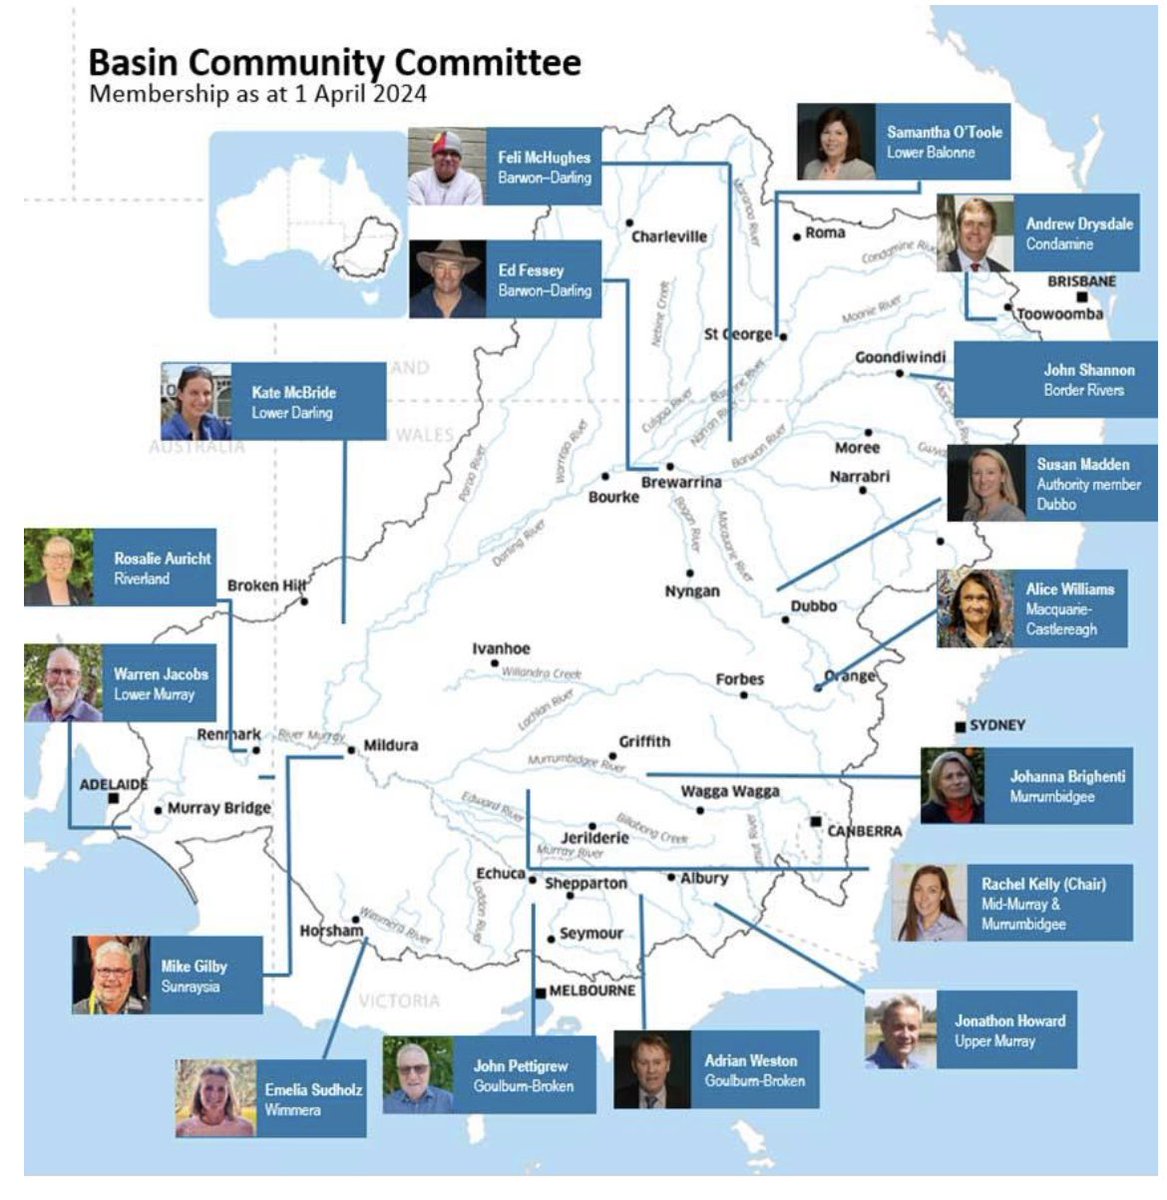 Officially a Basin Community Committee member 🎉 Looking forward to engaging with my community and beyond in how we can better manage our water resources and implement the basin plan.